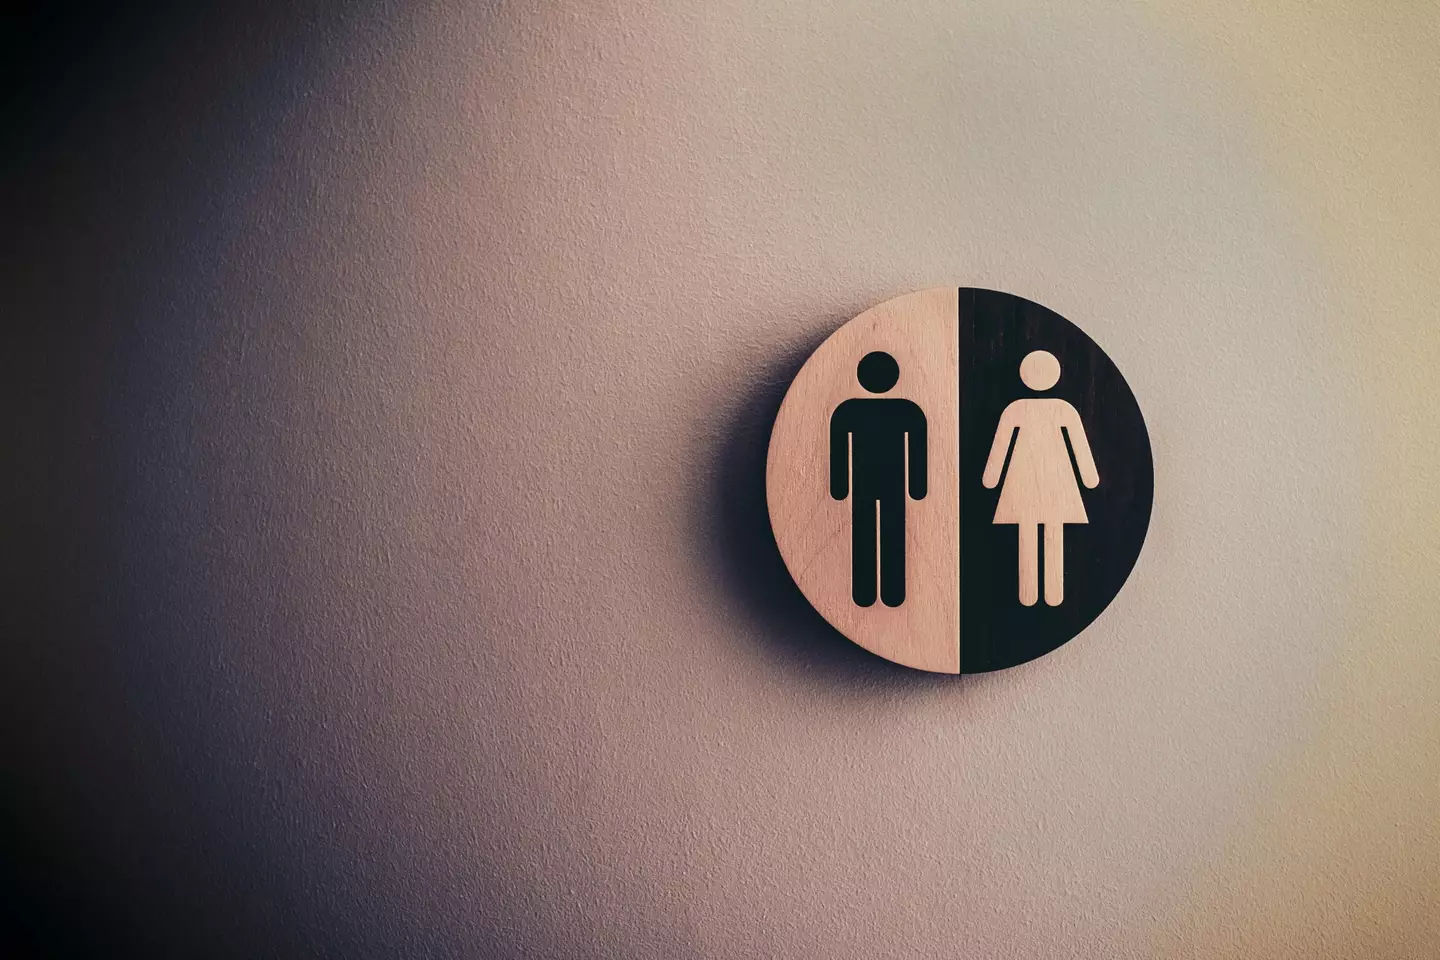 One woman had an uncomfortable encounter in a mixed-gender bathroom whilst at work.